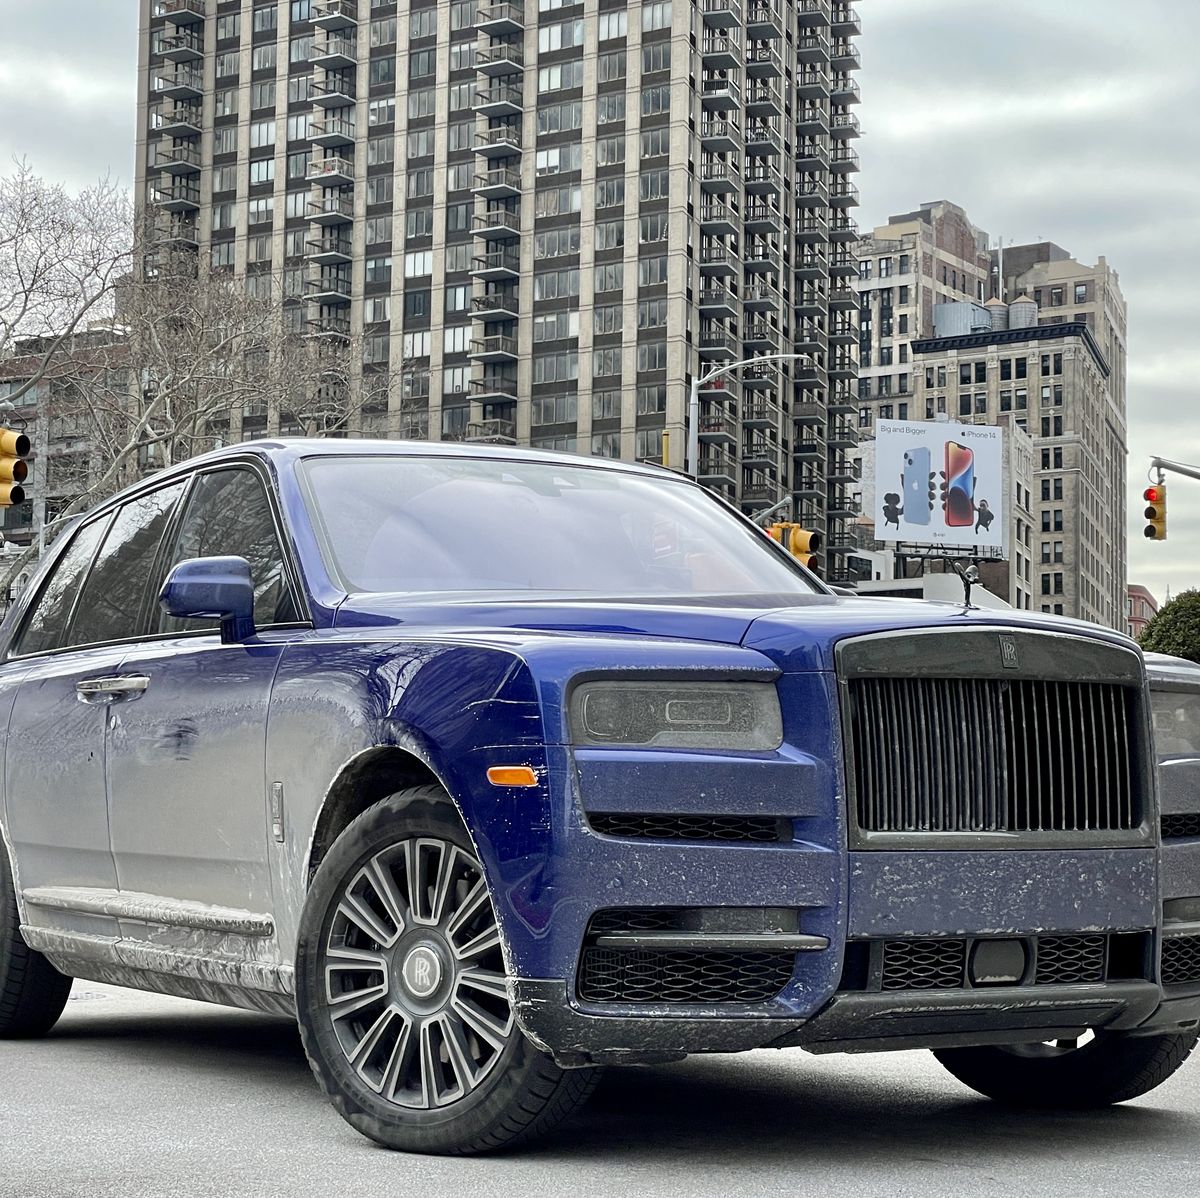 Rolls-Royce Car and SUV List: Price, Reviews, and Specs